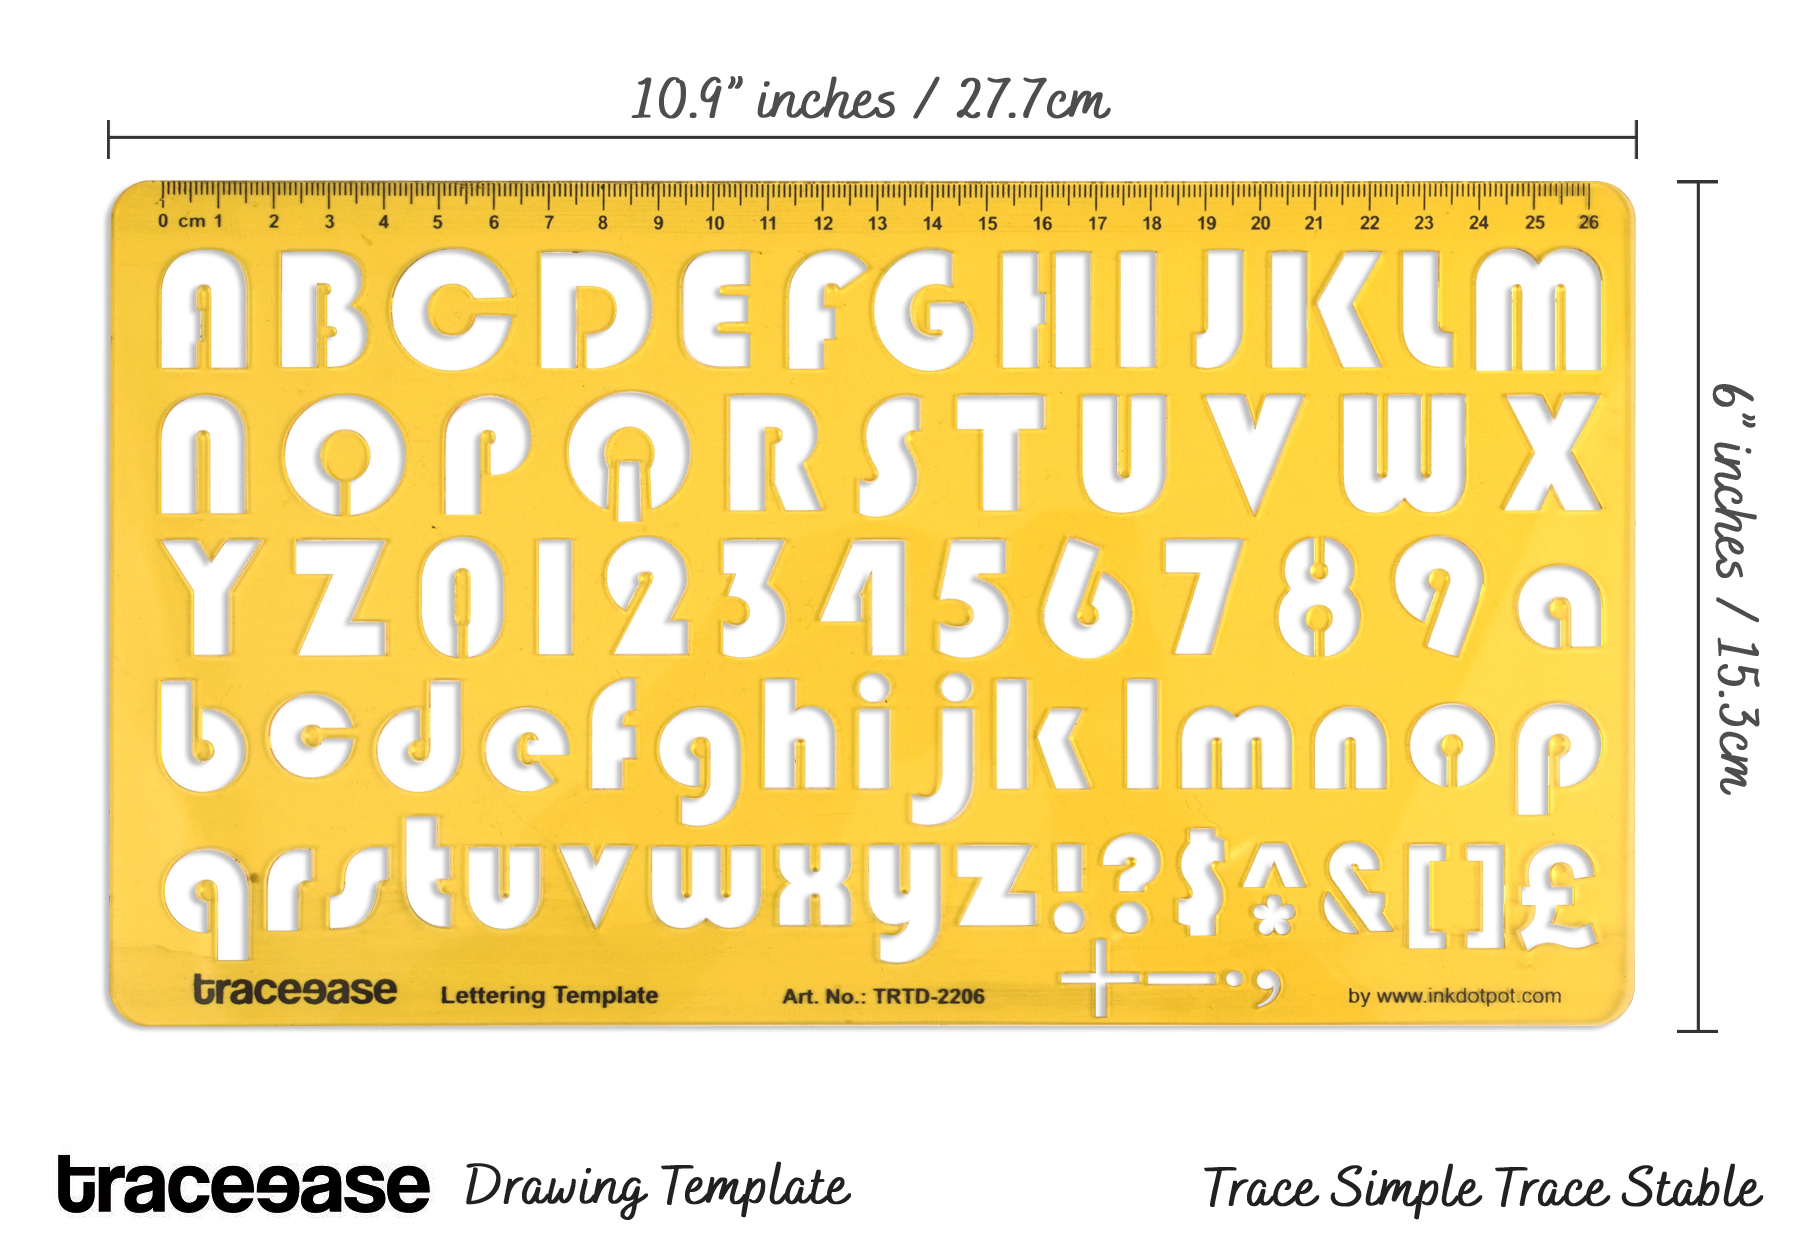 traceease-upper-lower-case-english-alphabet-number-drafting-tools-qtg